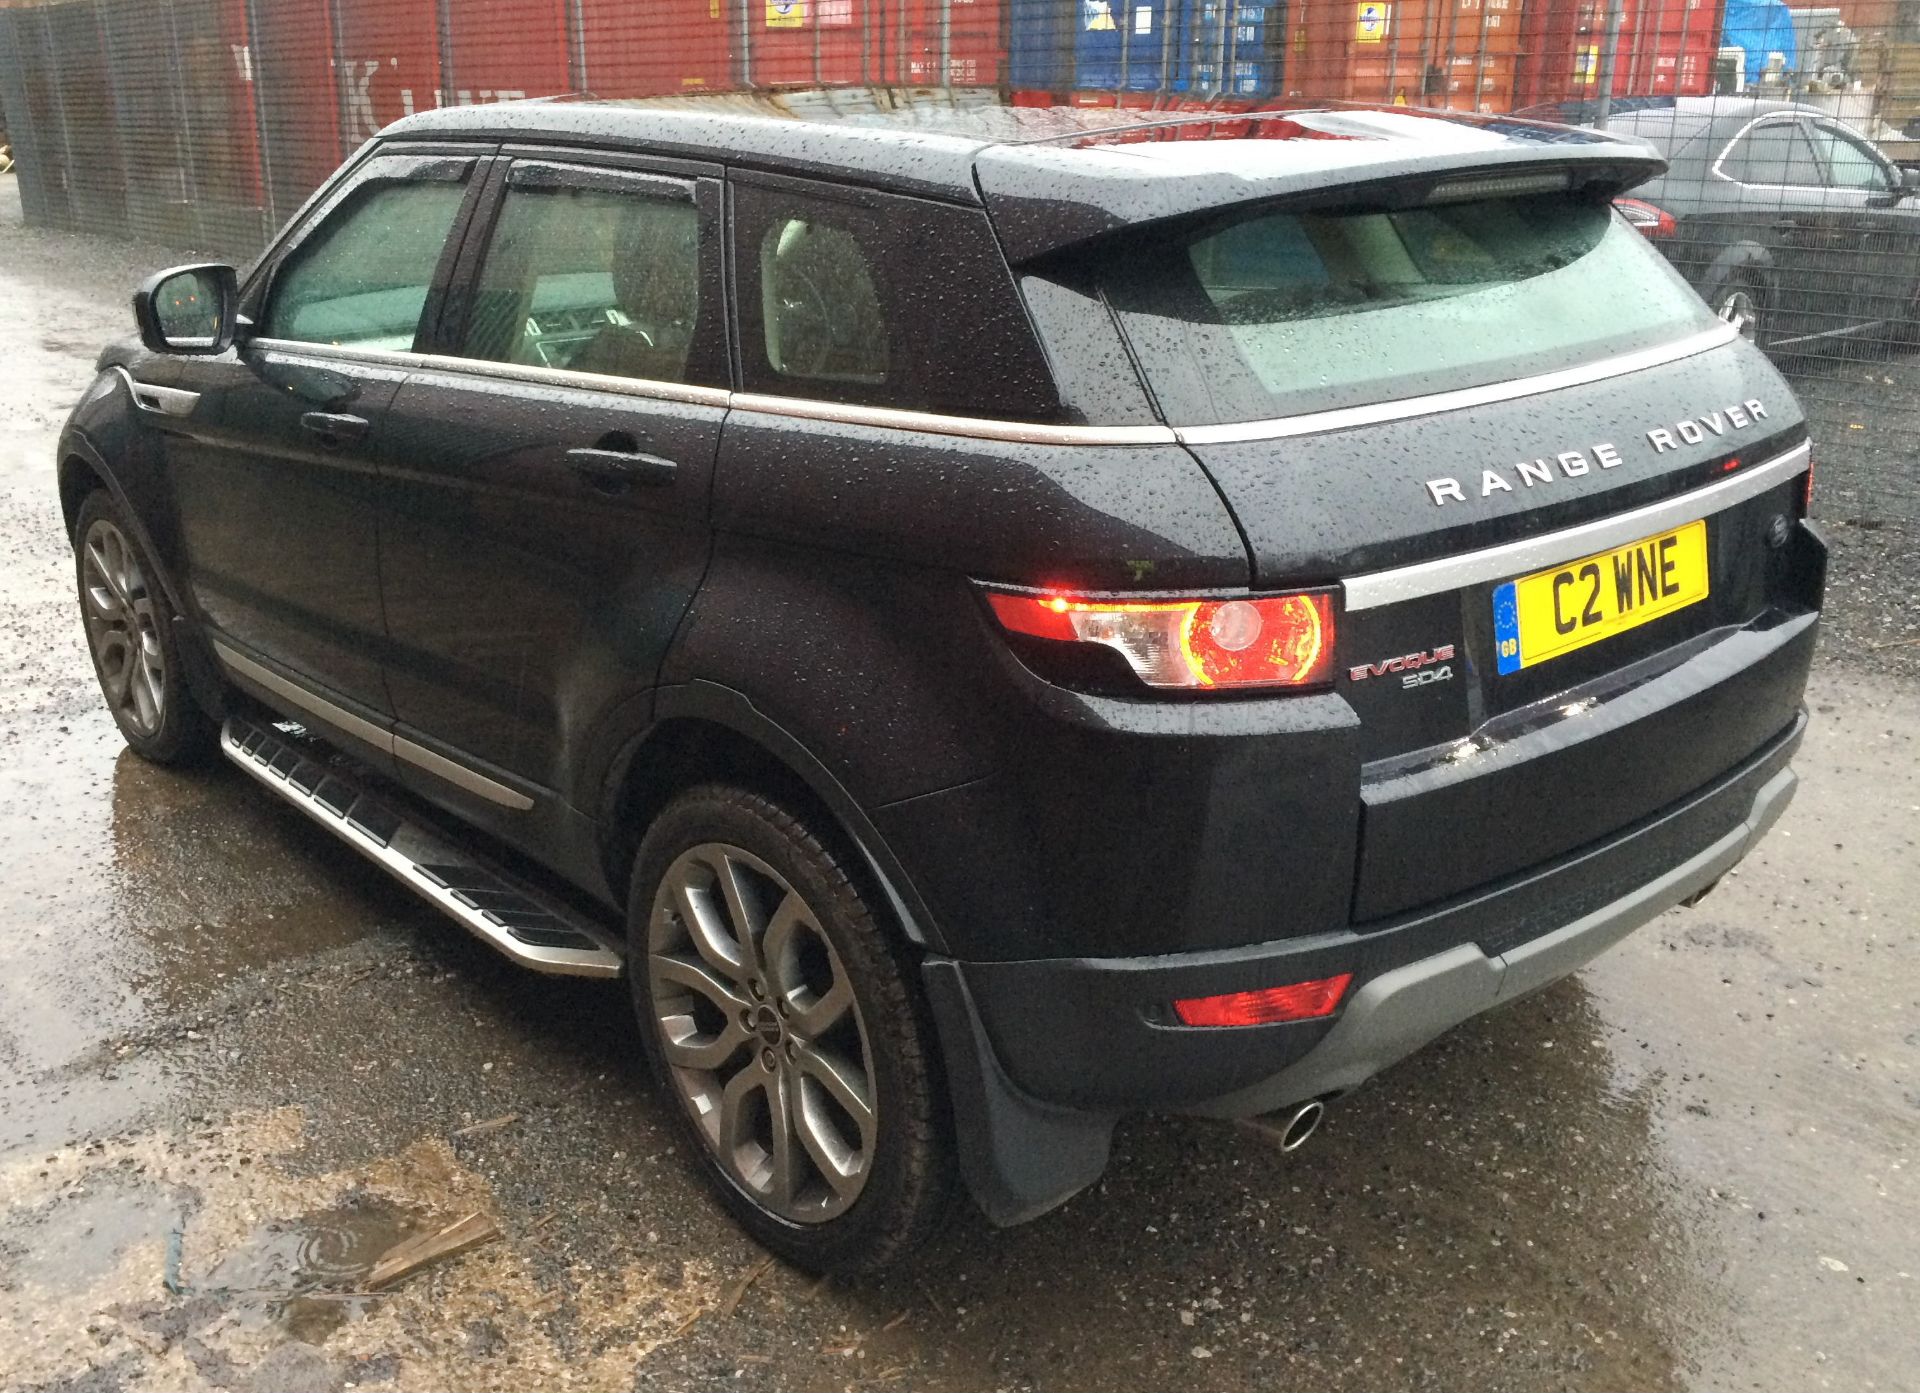 A Range Rover Evoque SD4 Hatchback Reg. No.C2WNE, first registered 2012, indicated 32,956 miles, - Image 3 of 8